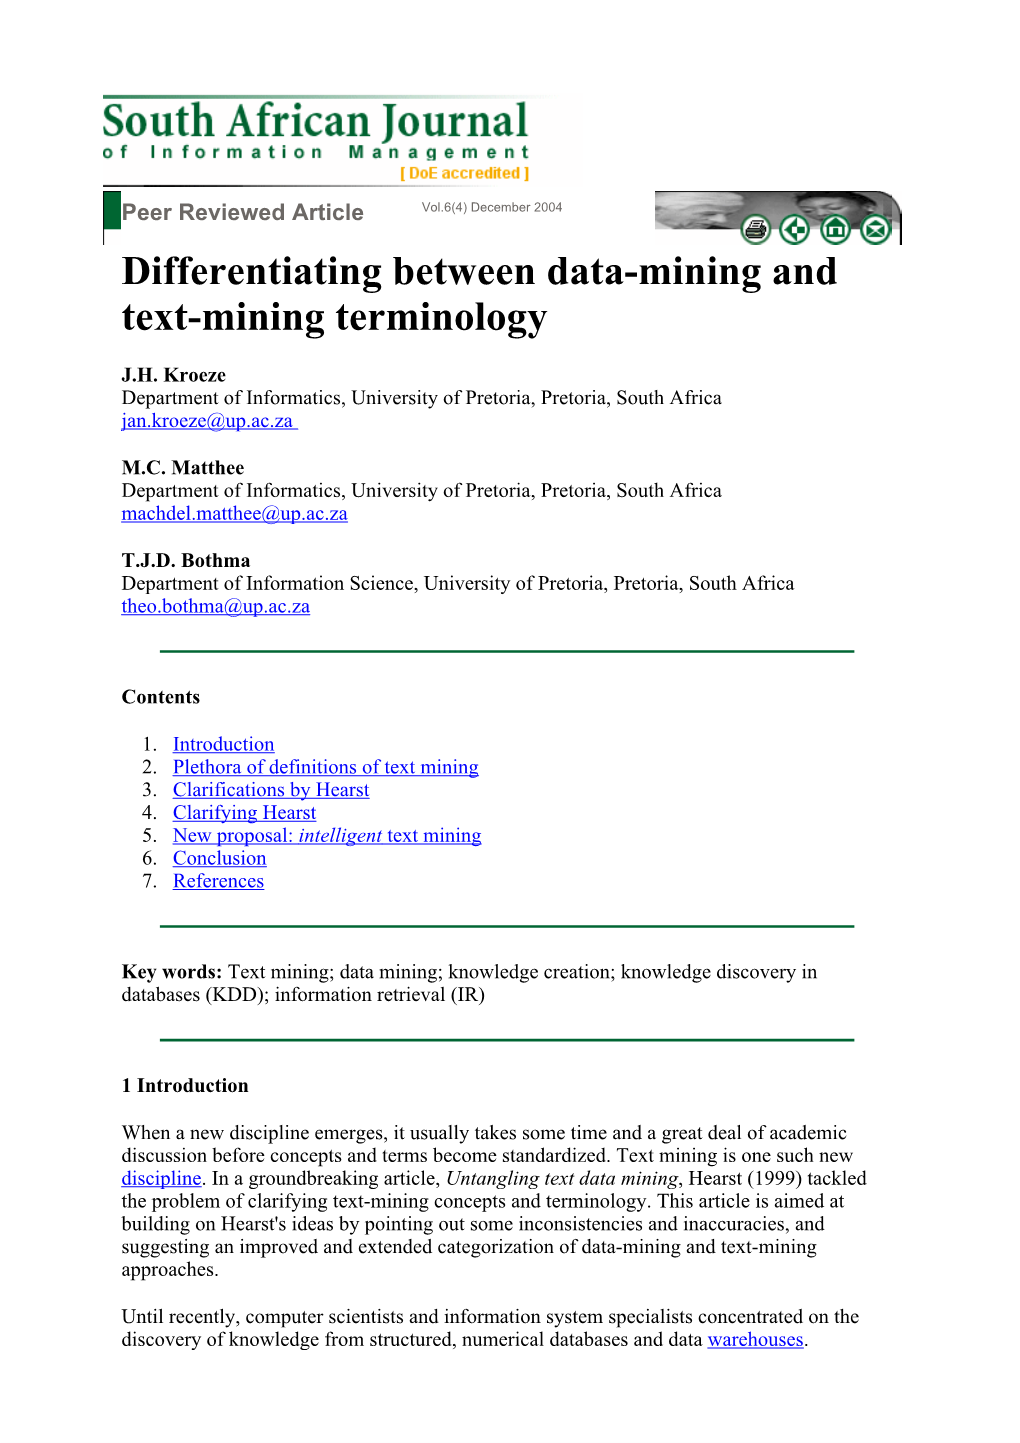 Differentiating Between Data-Mining and Text-Mining Terminology